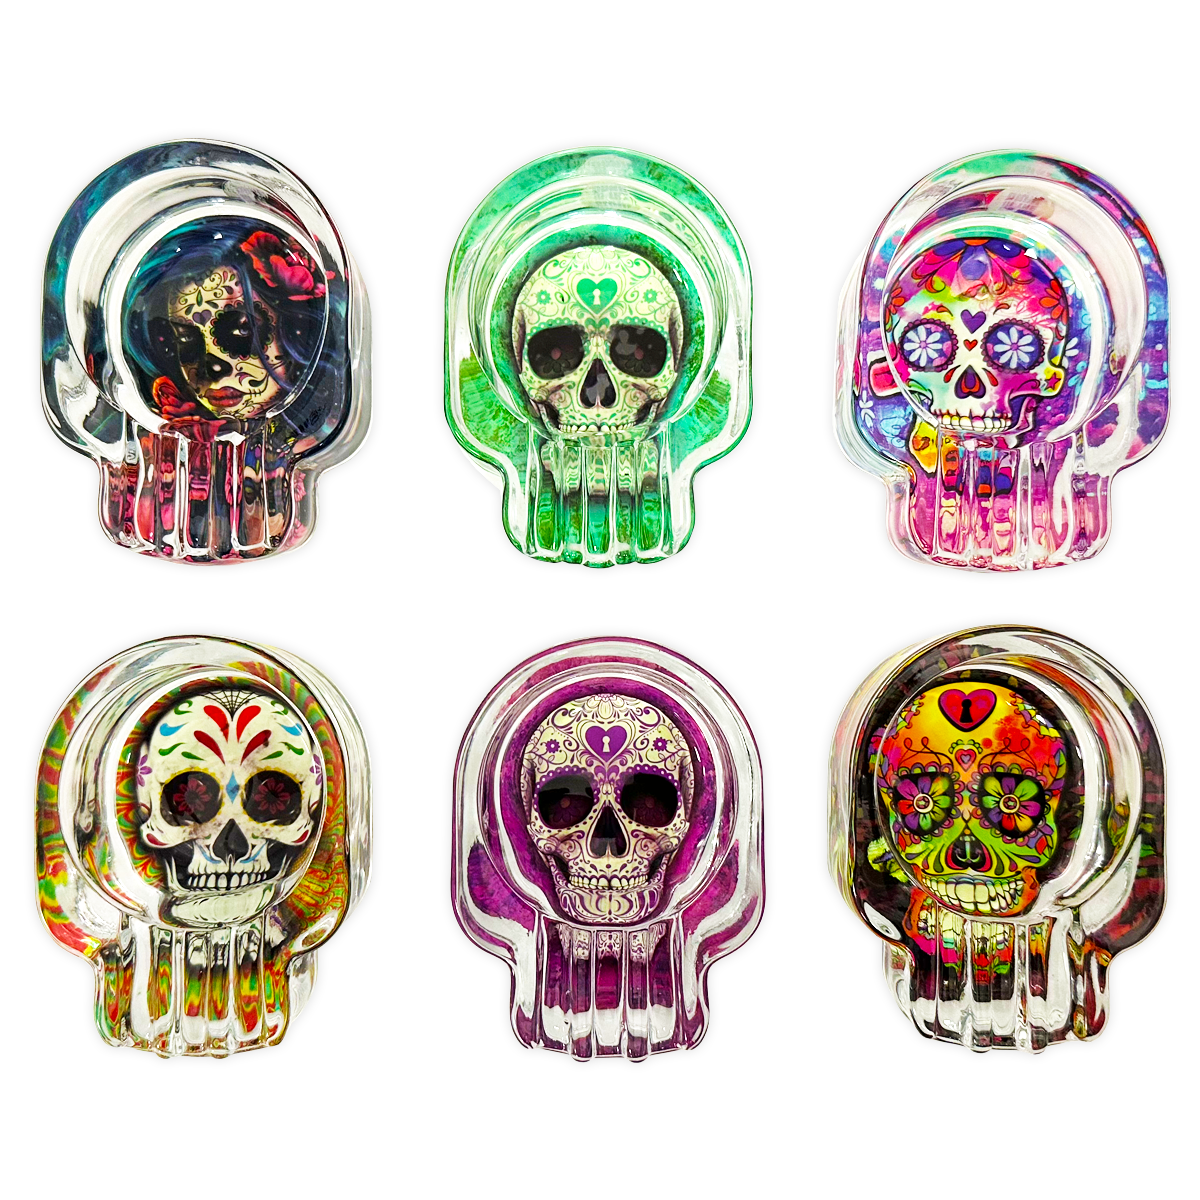 ITEM NUMBER 020120 SKULL GLASS ASHTRAY 6 PIECES PER DISPLAY